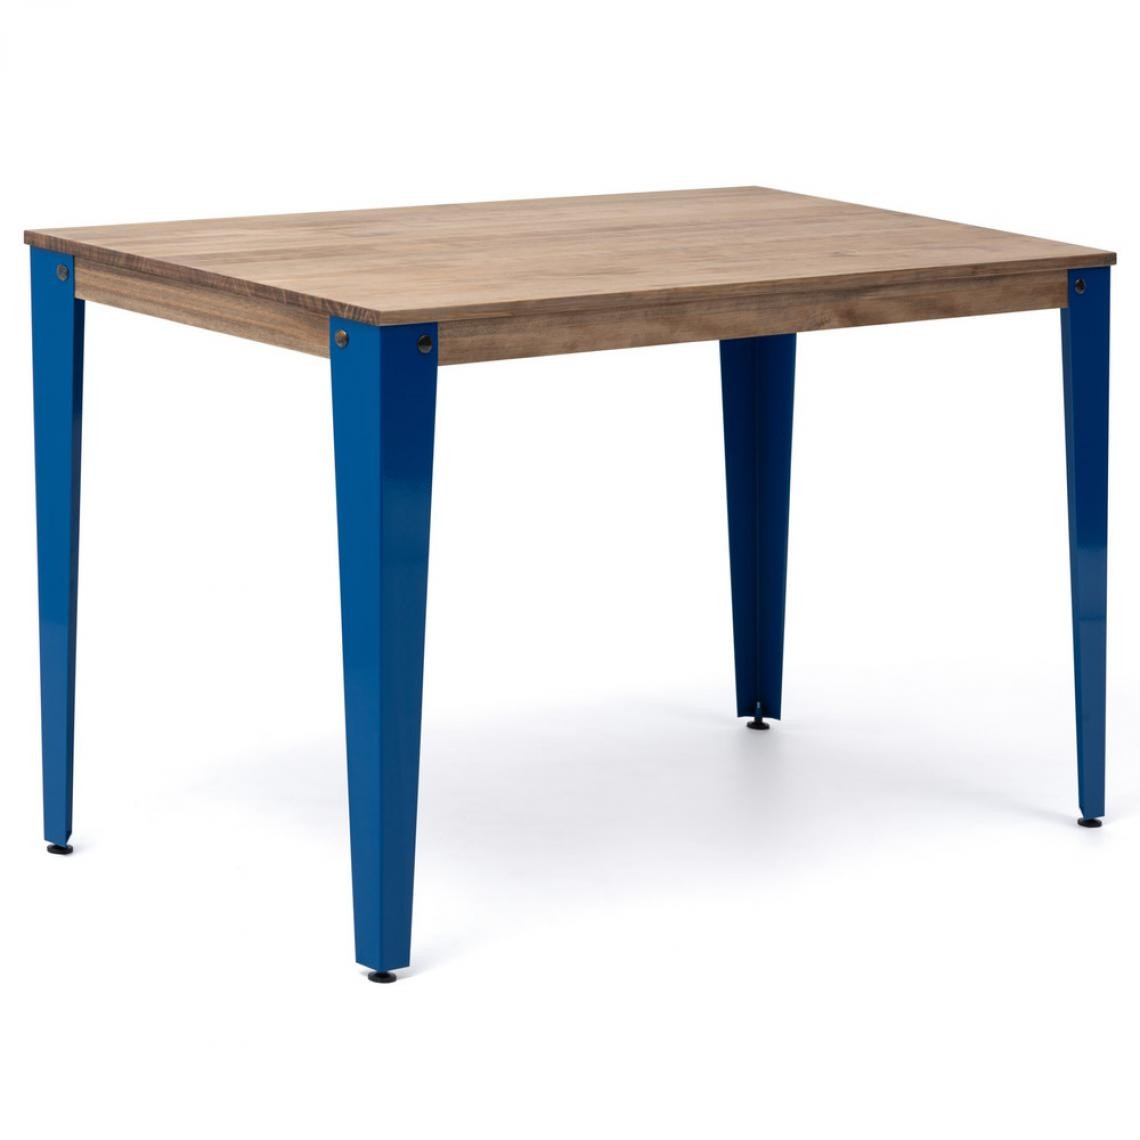 BOX FURNITURE - Table Salle a Manger Lunds 140x80x75cm Bleu-Vieilli Box Furniture - Tables à manger